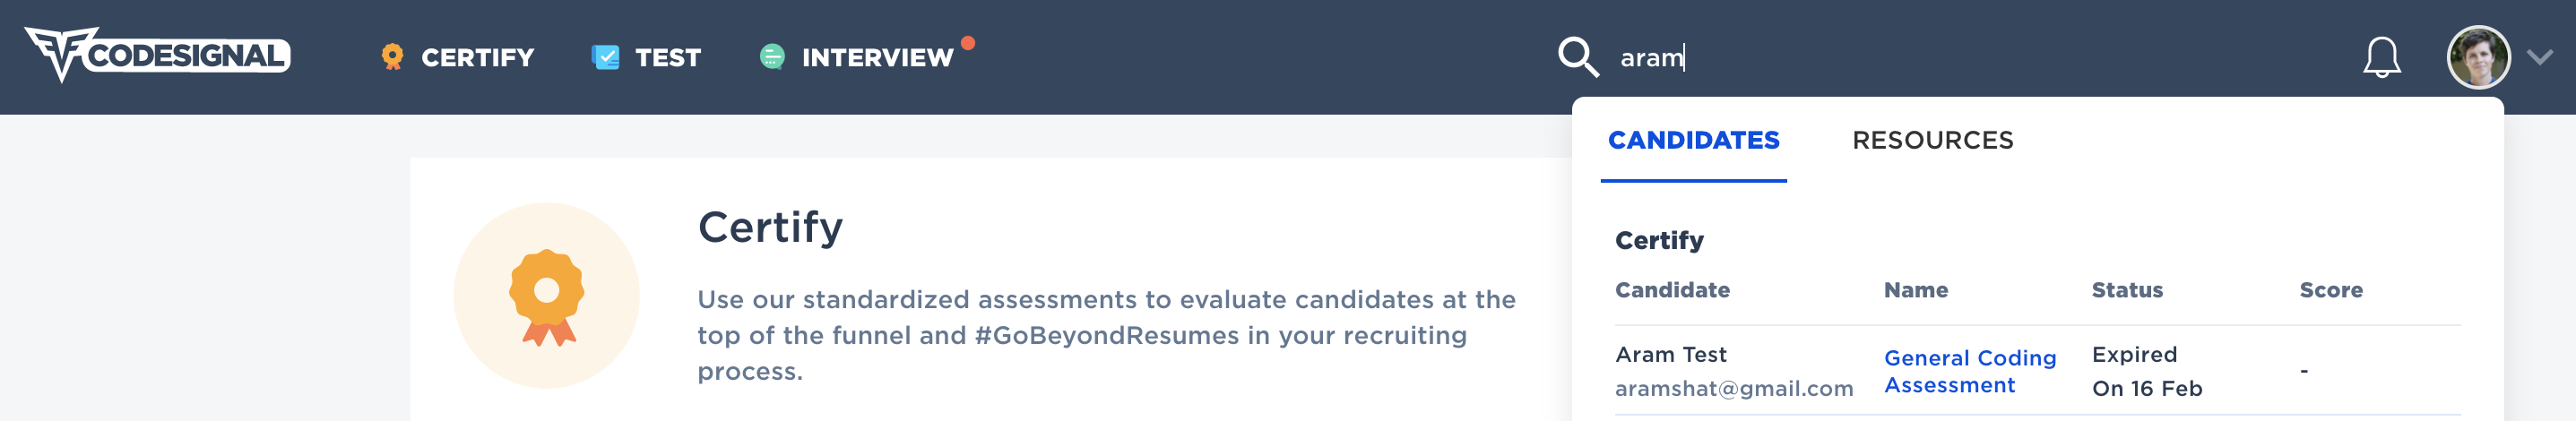 certify_universalsearch_candidate.png